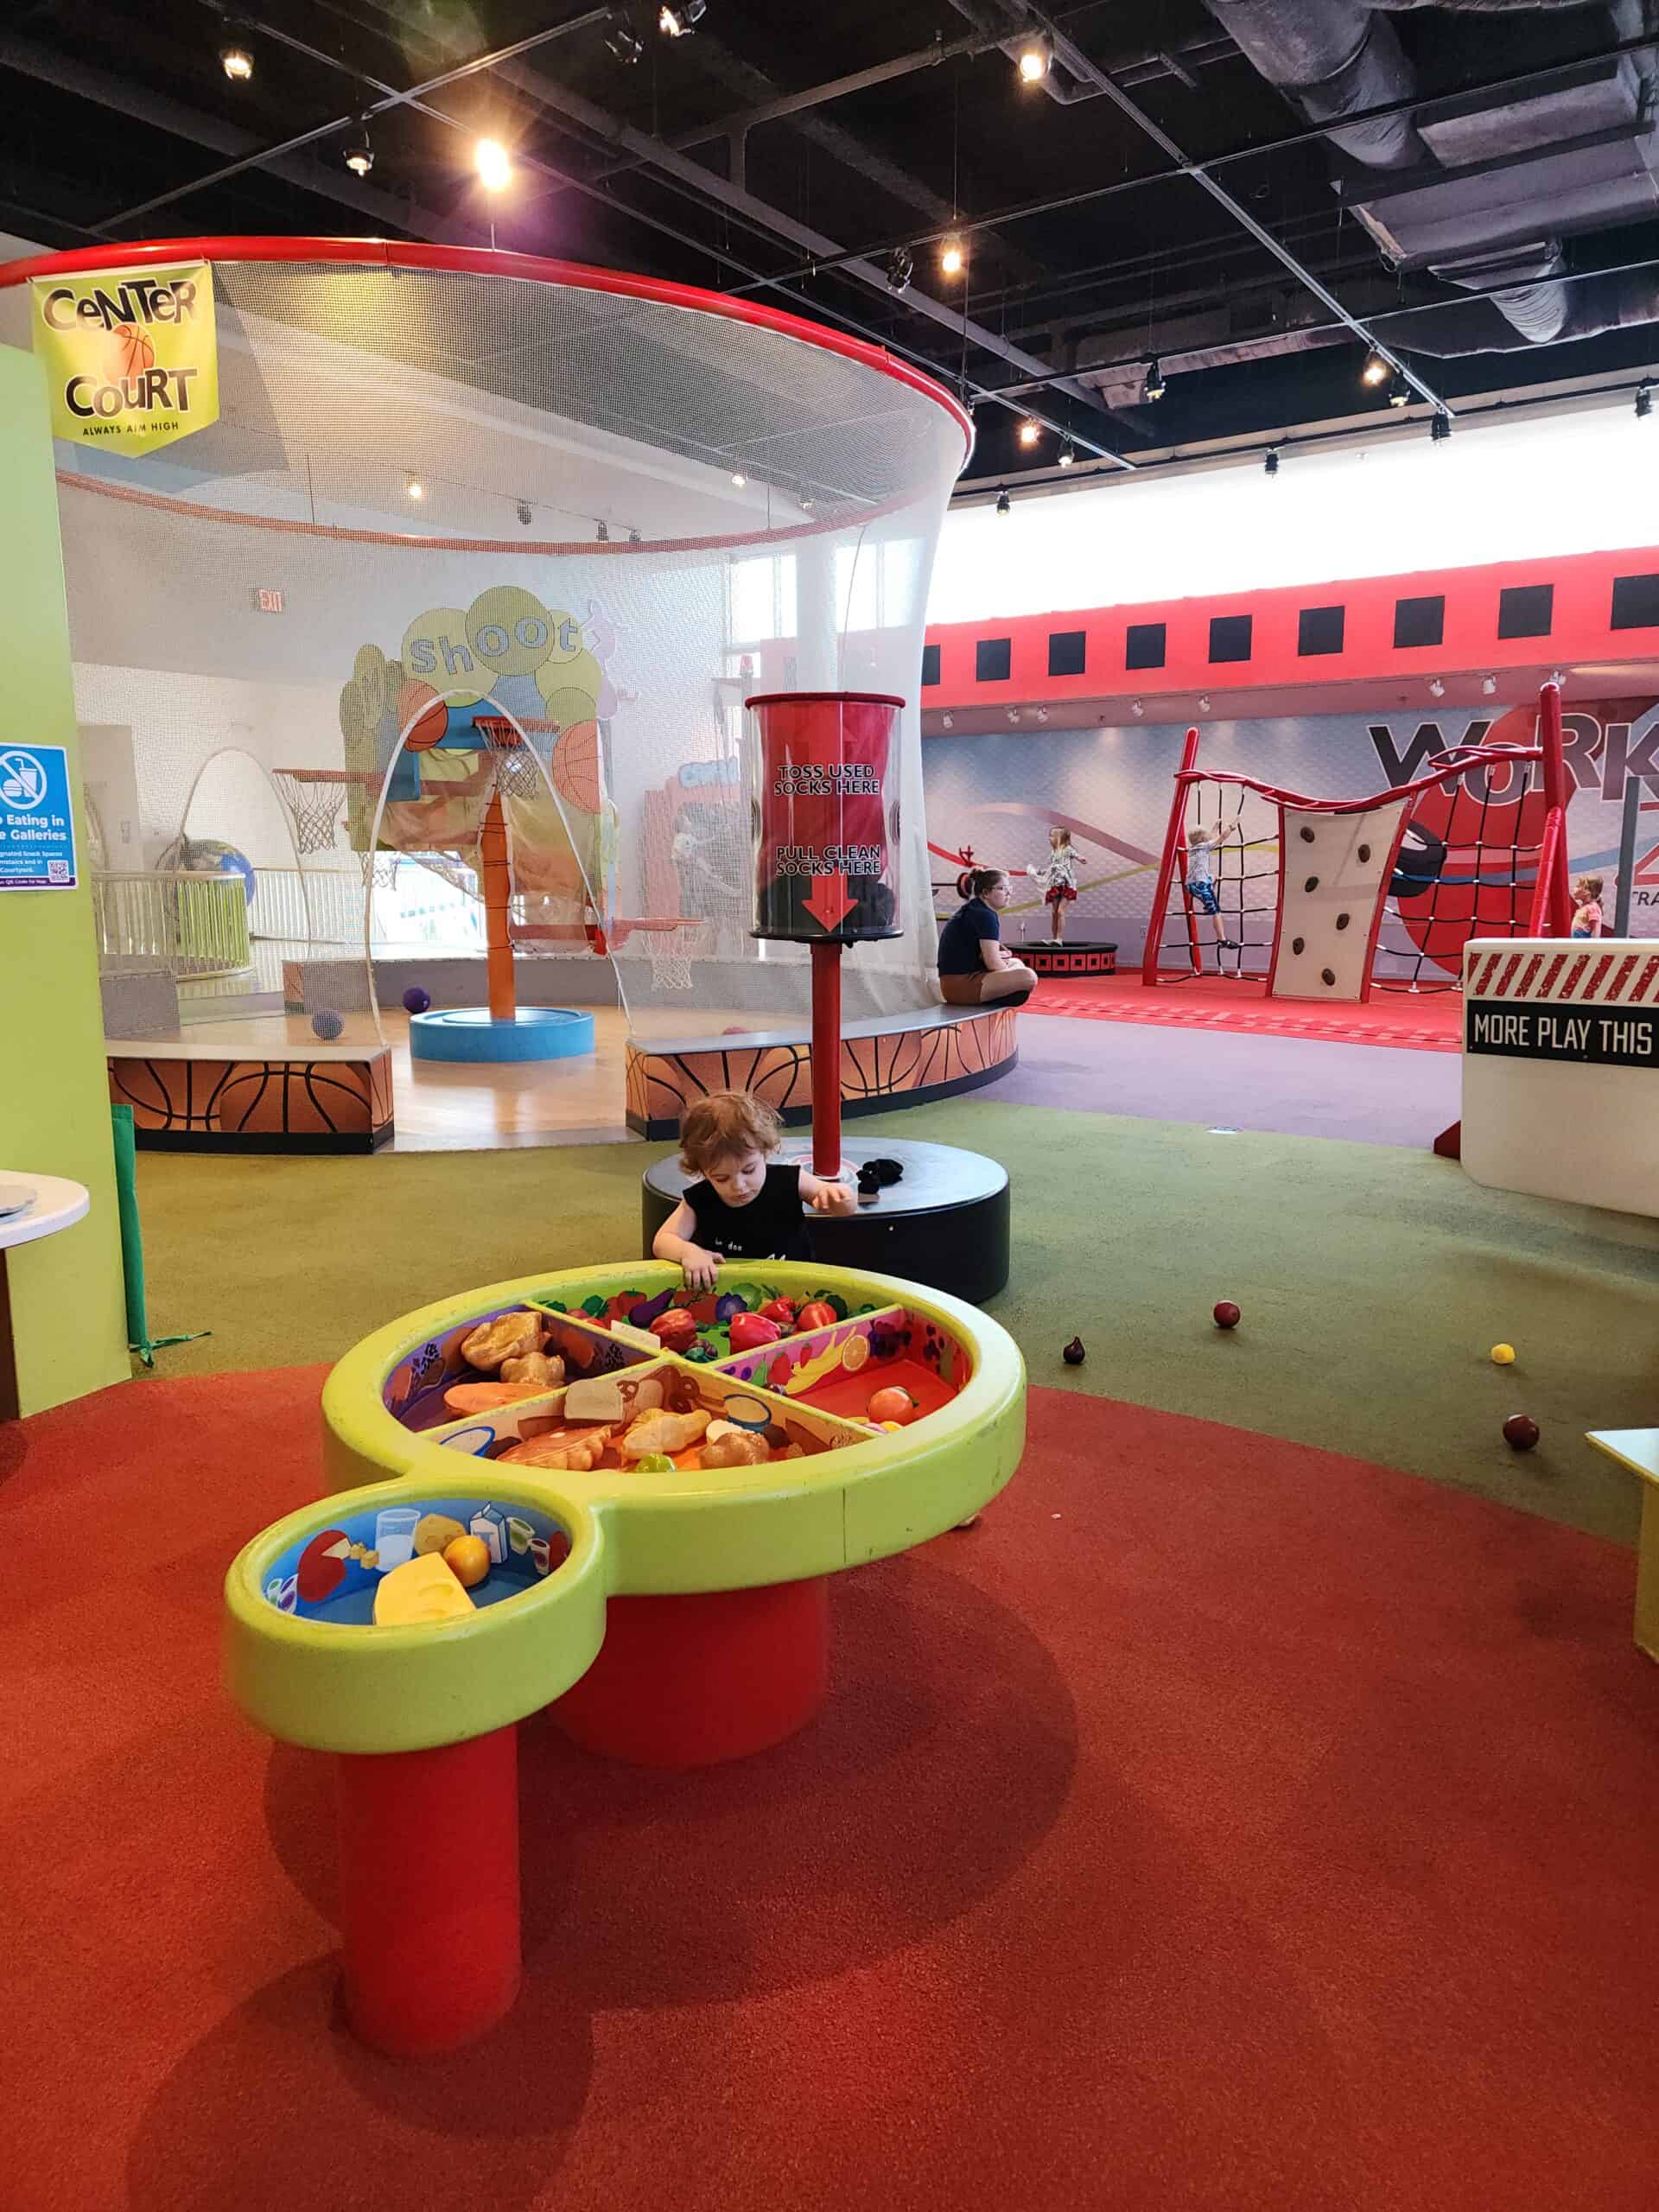 a child plays with a raised platgorm containing toy food in a colorful kids museum setting